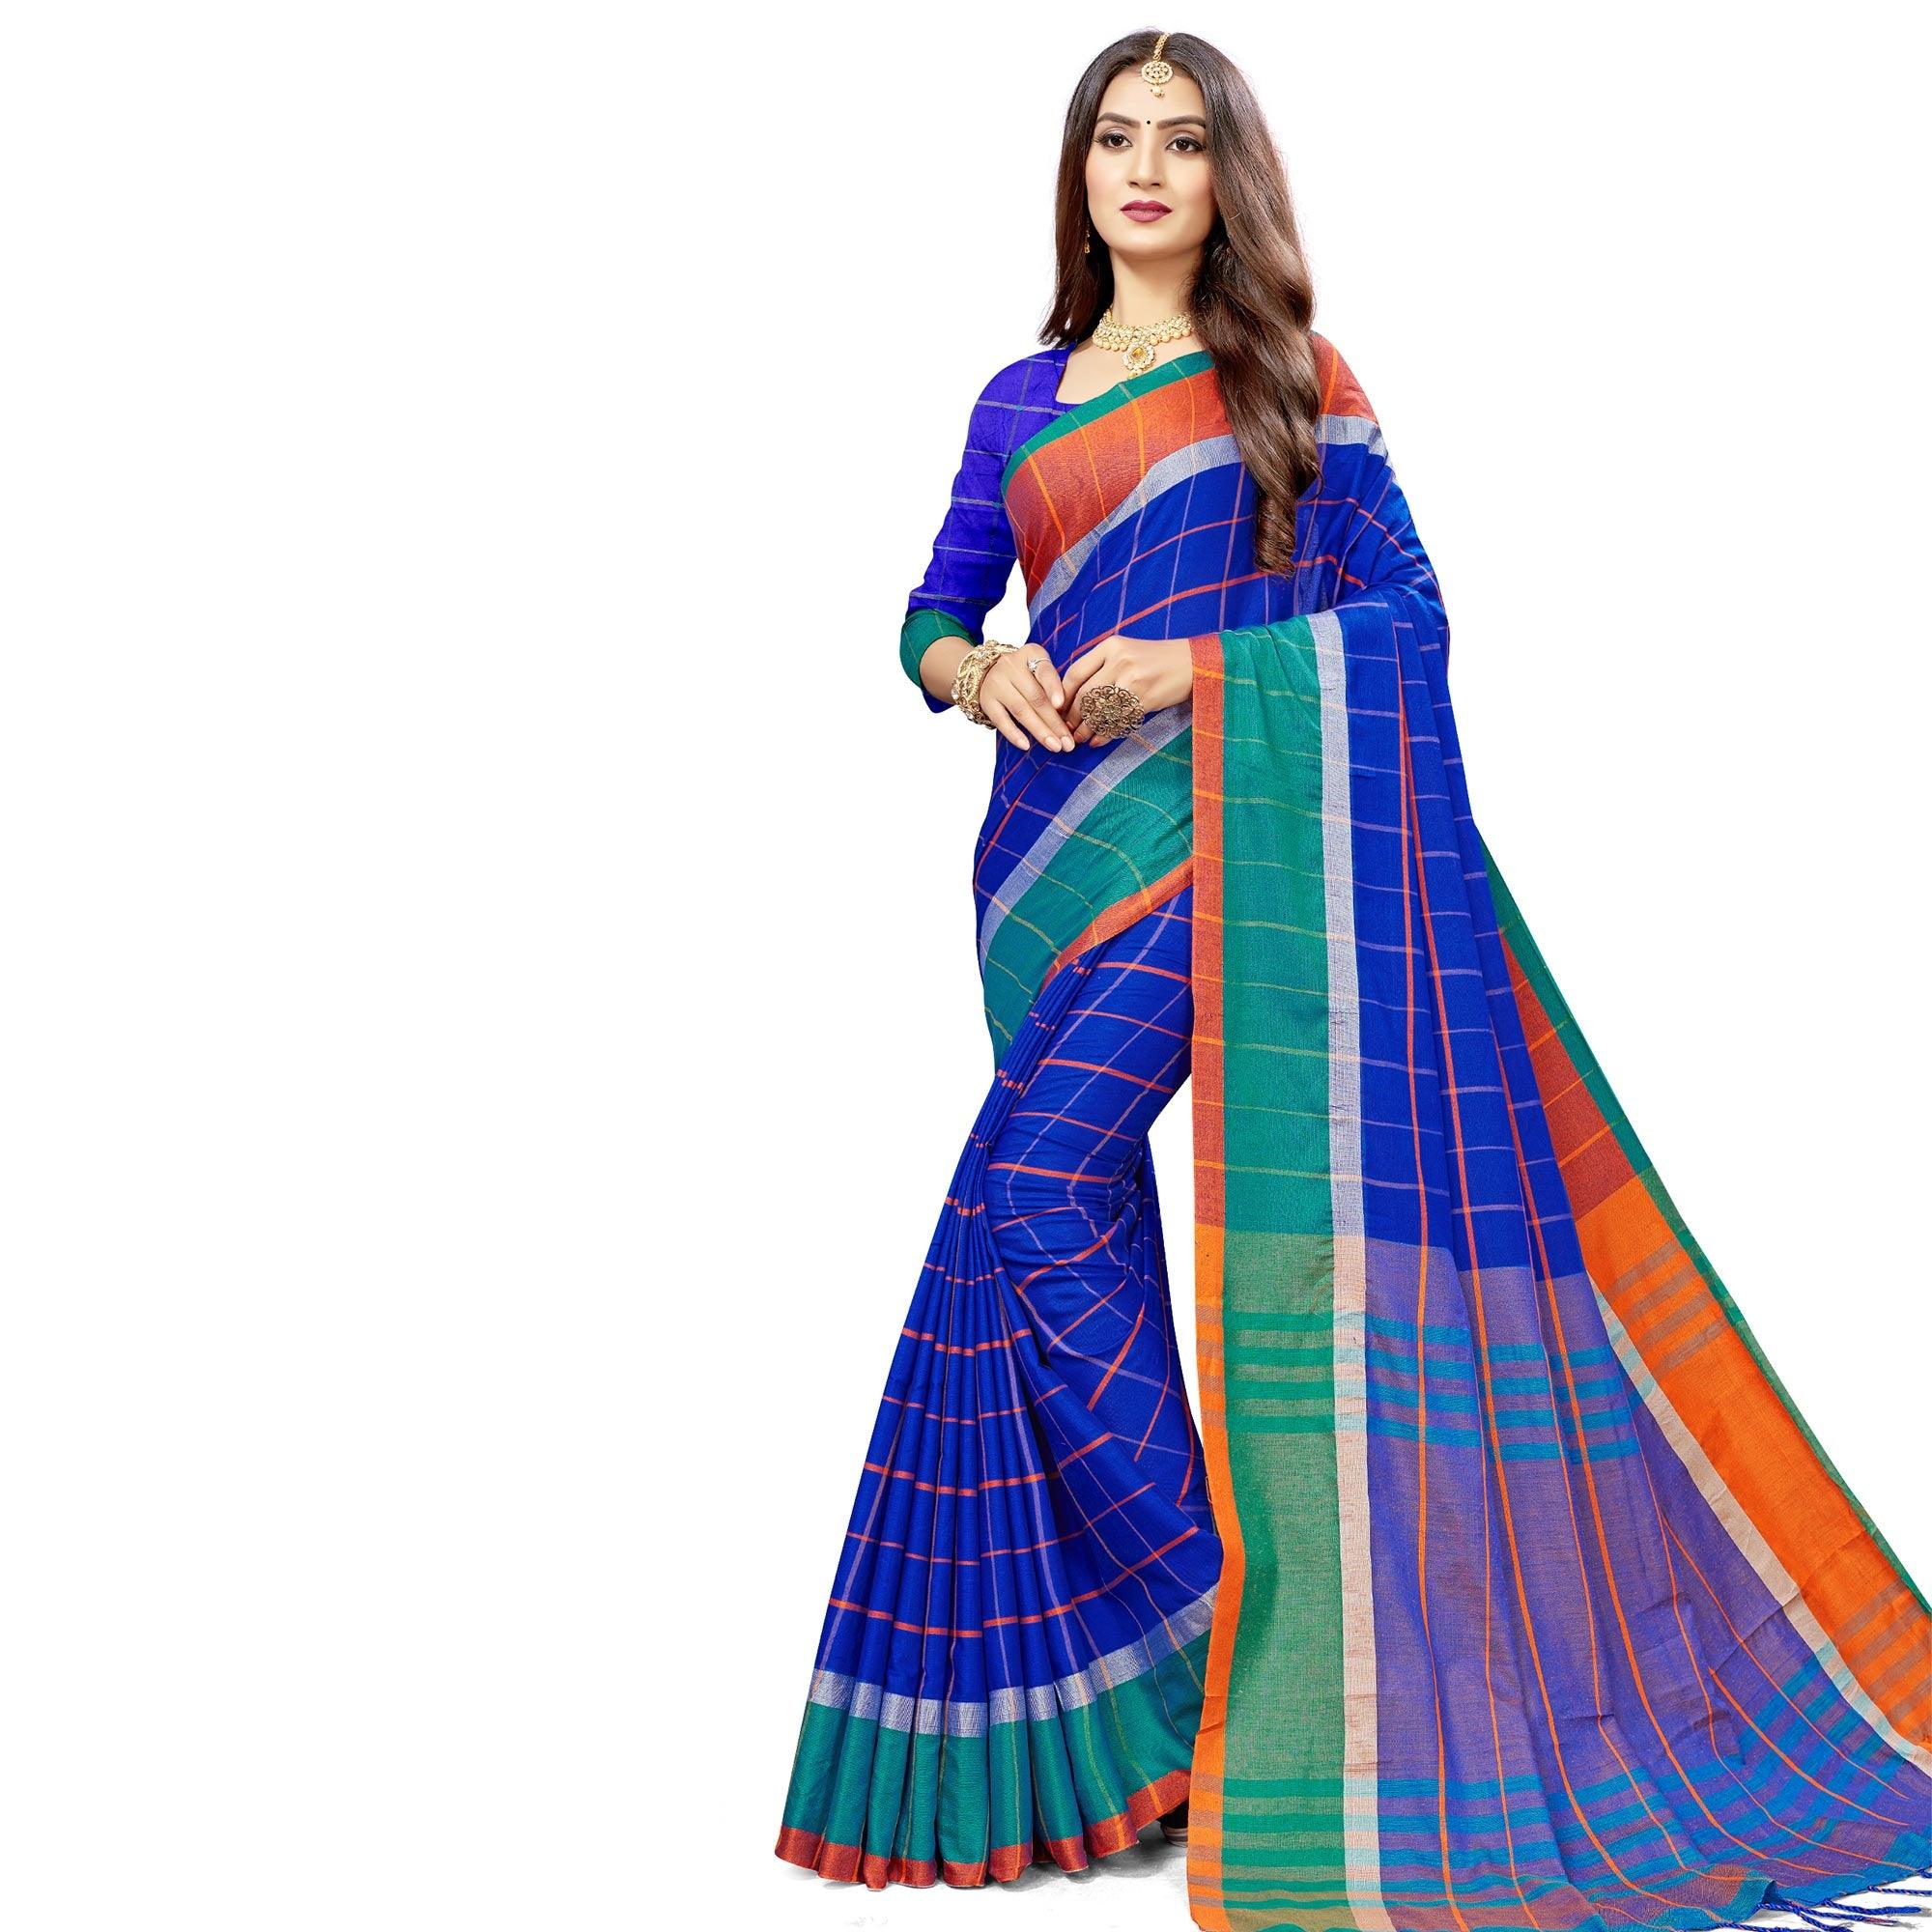 Engrossing Blue Colored Festive Wear Stripe Printed Cotton Silk Saree With Tassels - Peachmode